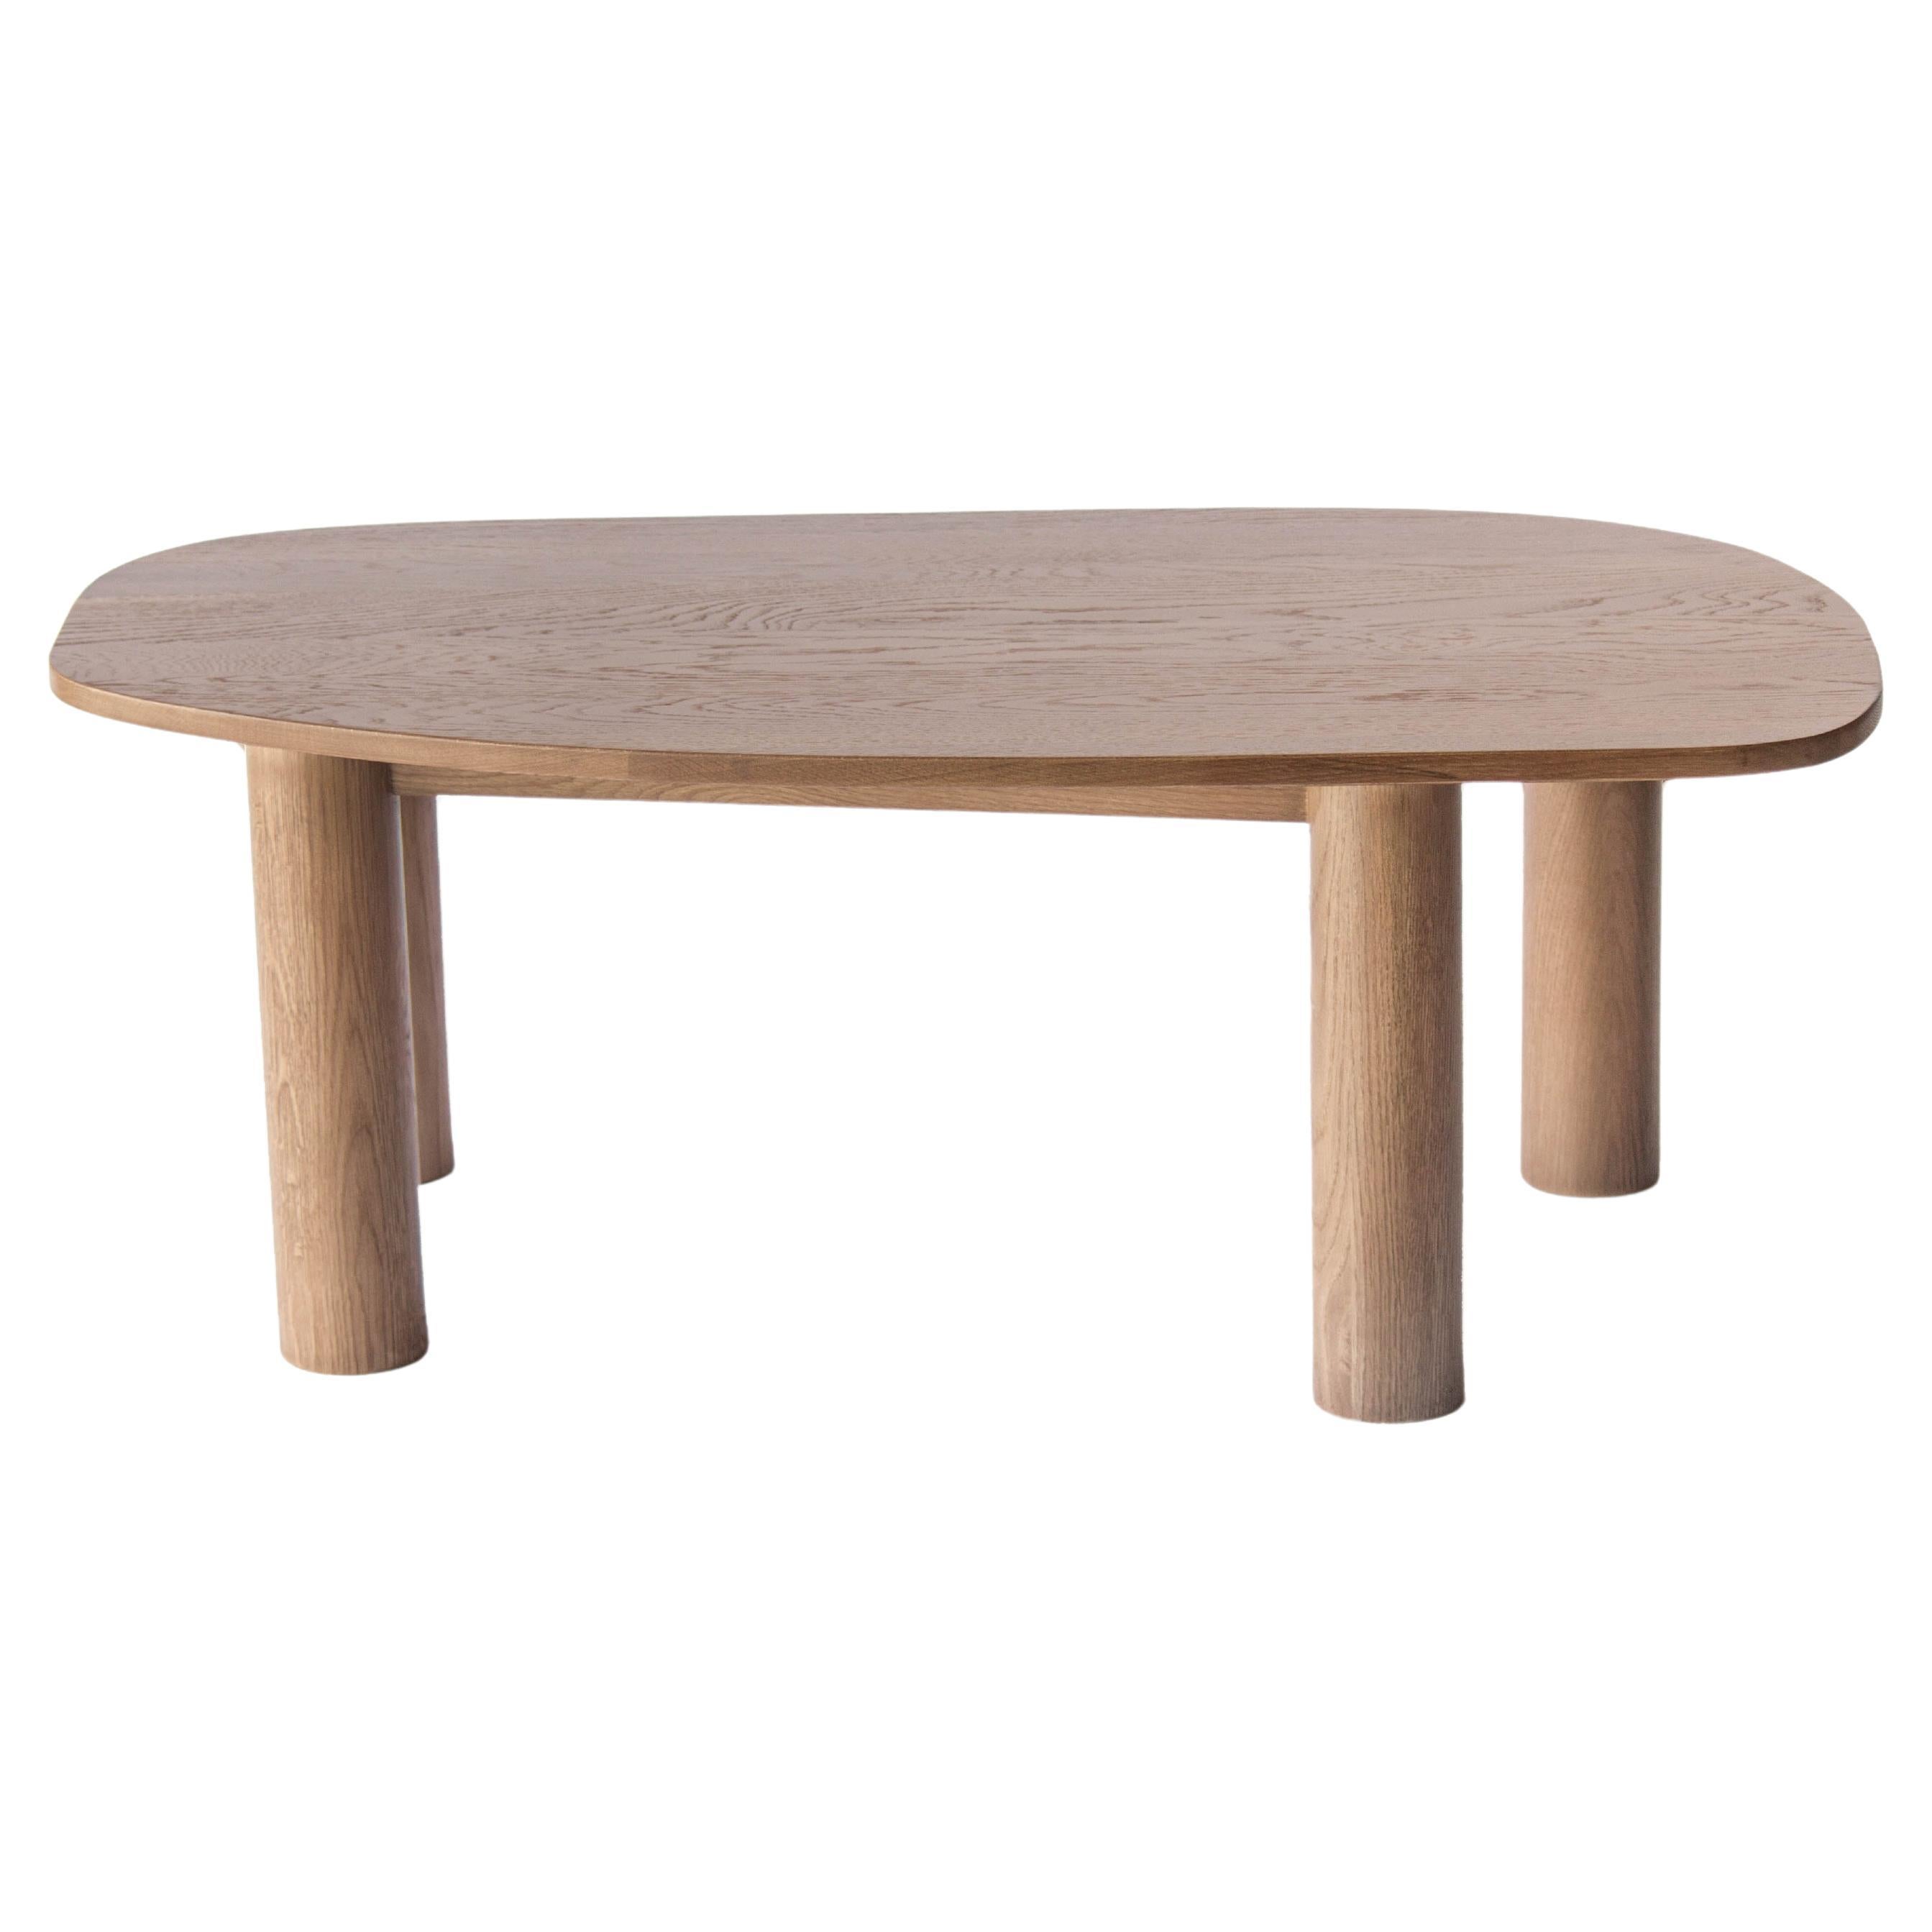 Ohm Coffee Table 48" by Sun at Six, Sienna Coffee Table in Wood